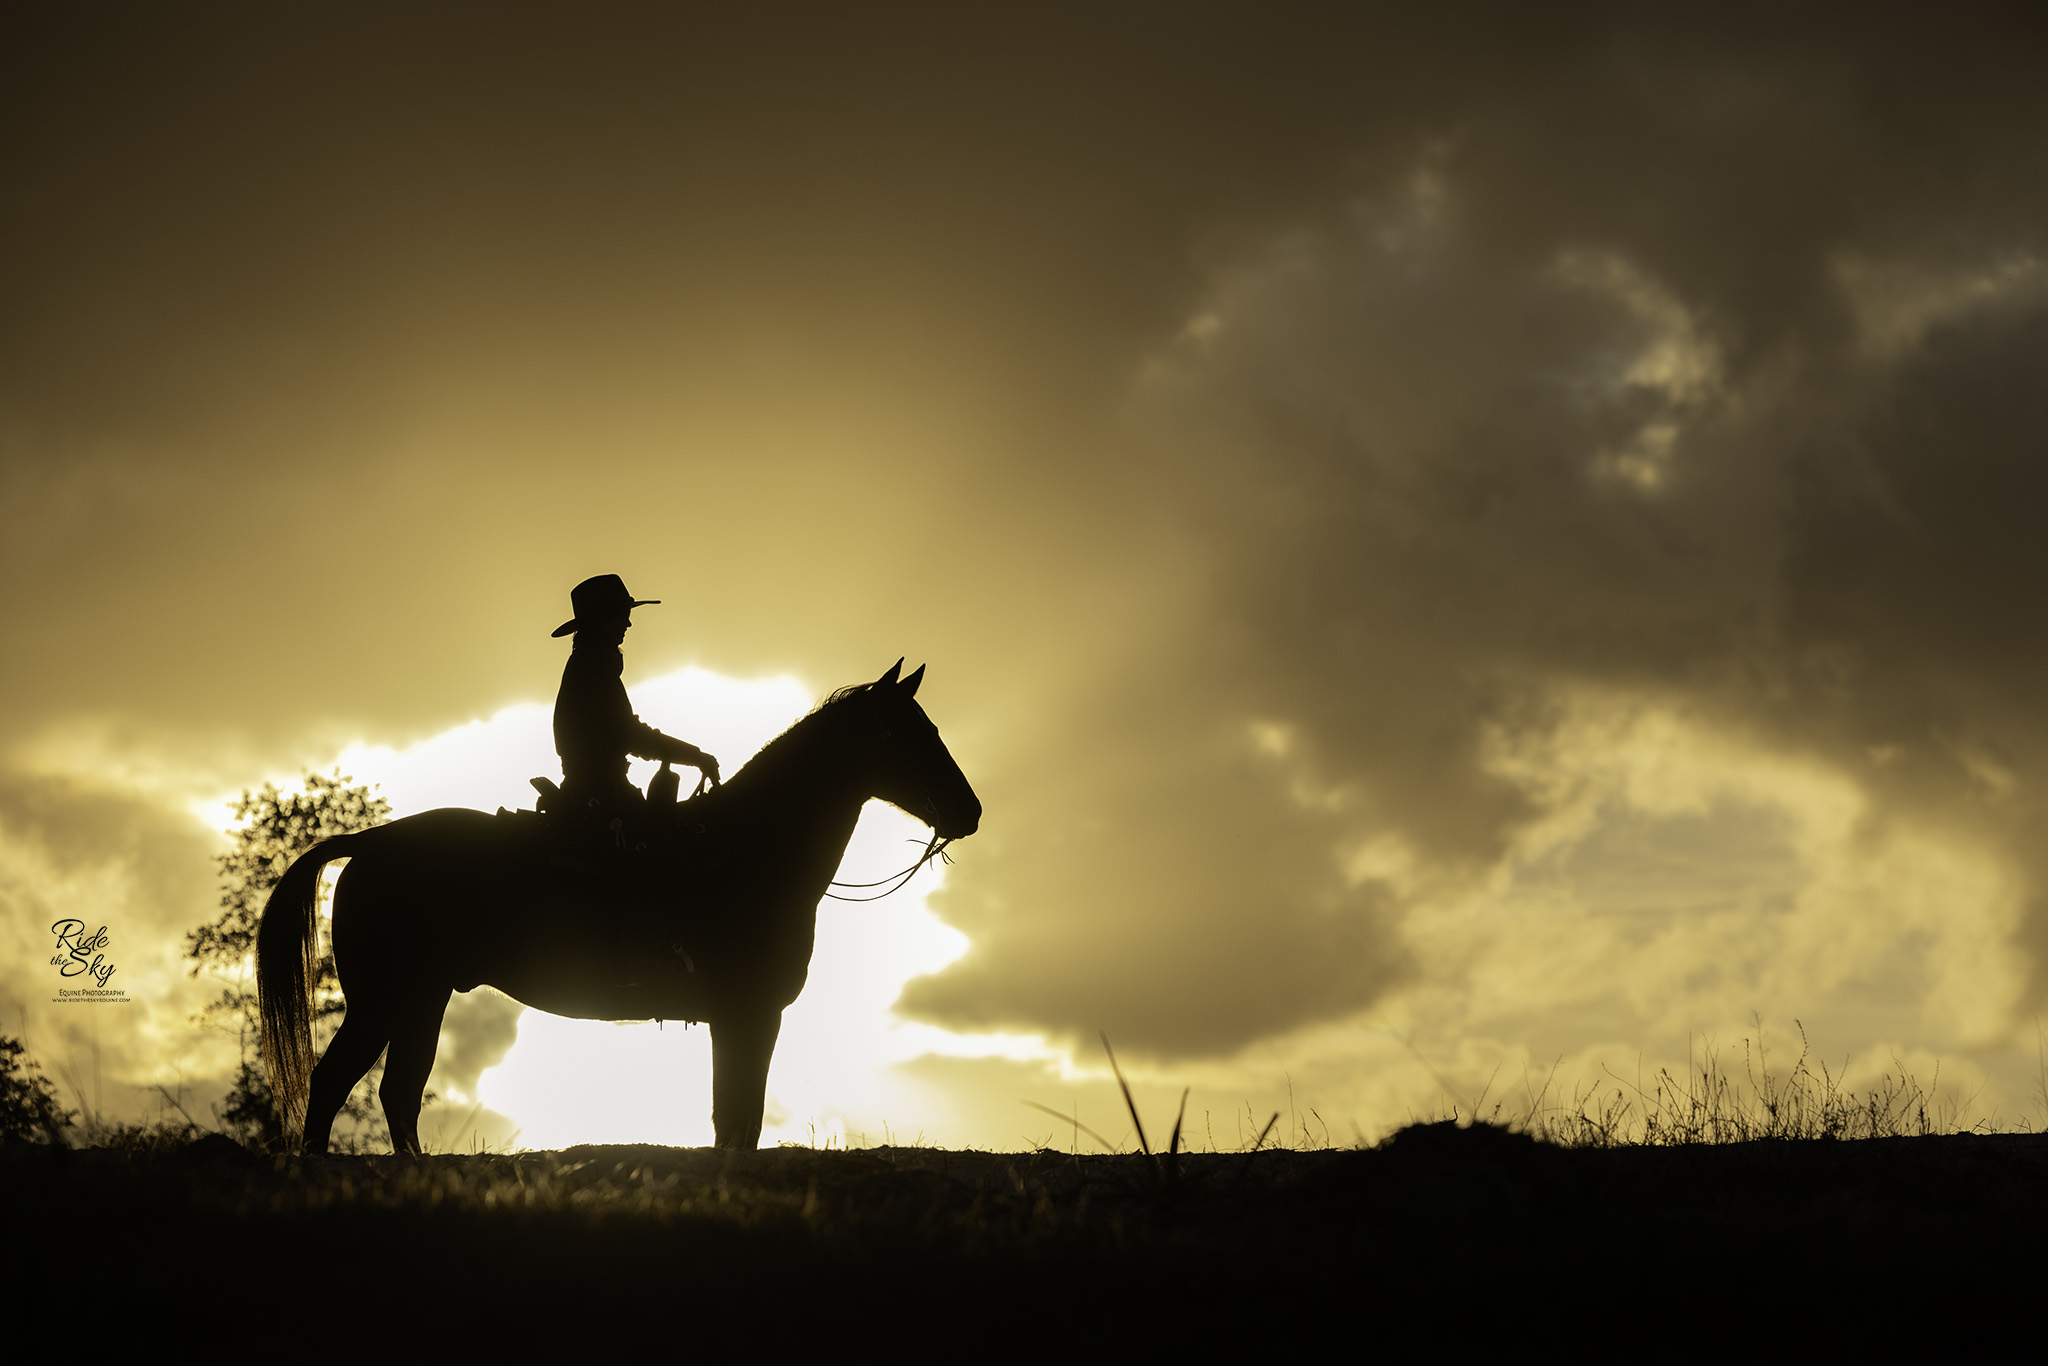 Portrait of a Horseback rider and horse in silhouette at sunset on a ridge